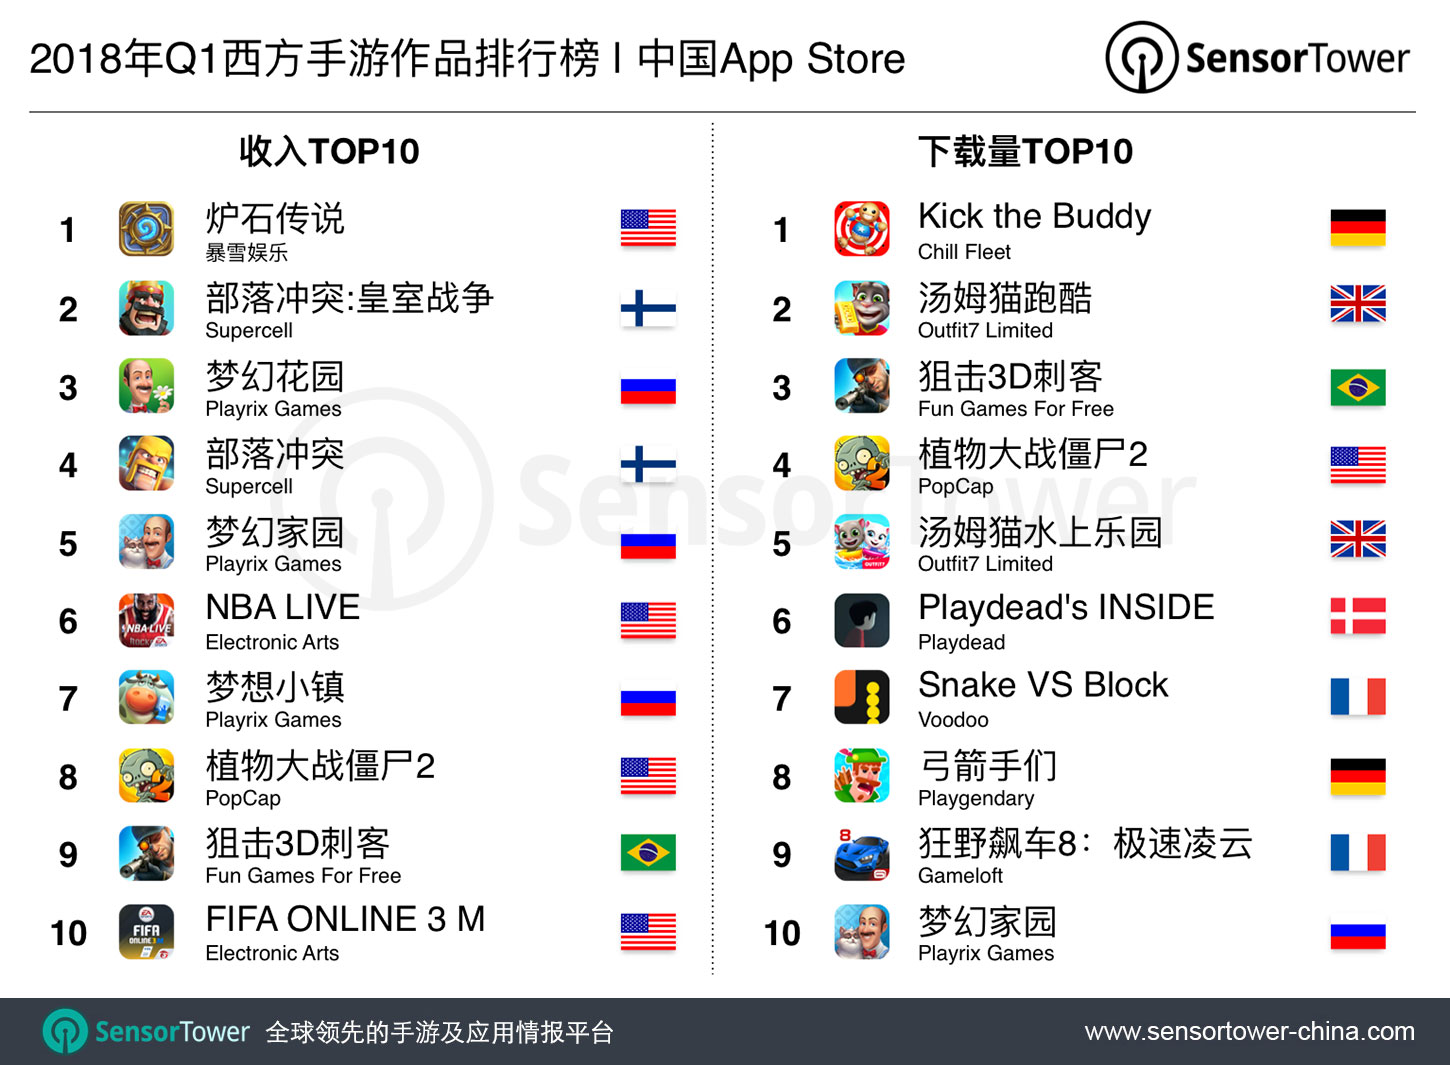 Q1 2018 Top 10 Western Games in China by Revenue and Downloads